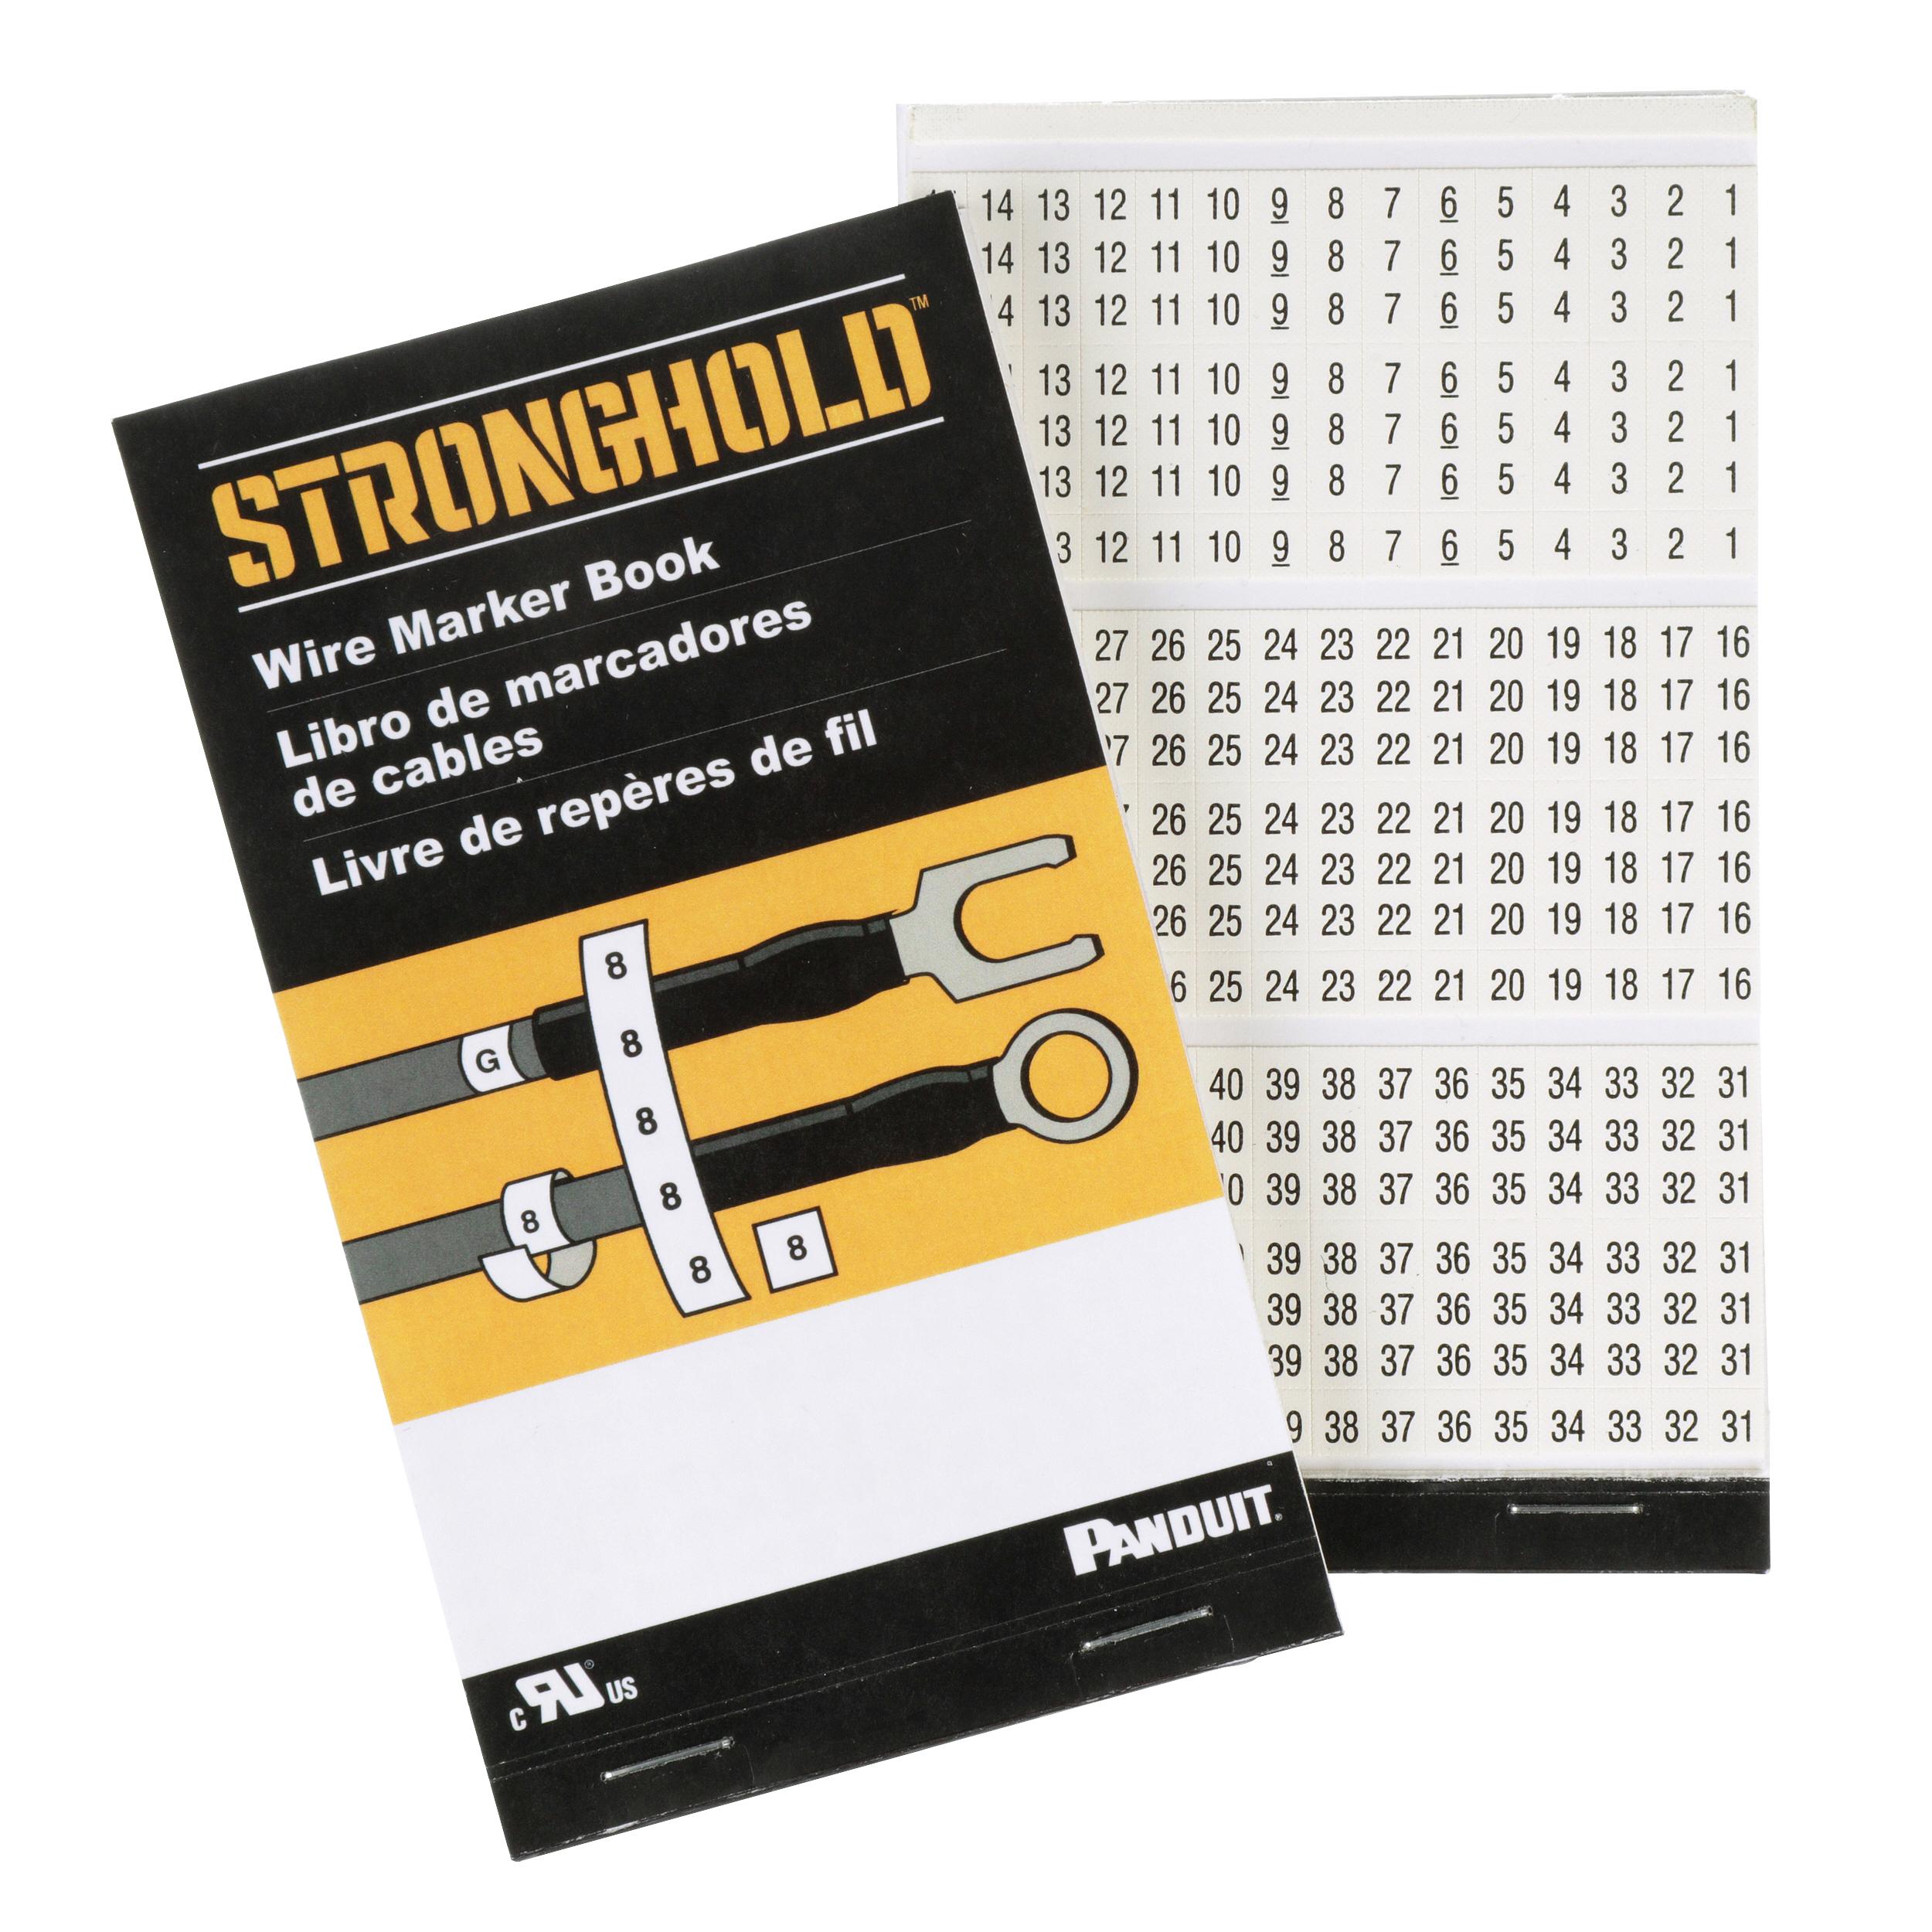 Panduit PCMB-13 StrongHold PCMB-13 Pre-Printed Wire Marker Books